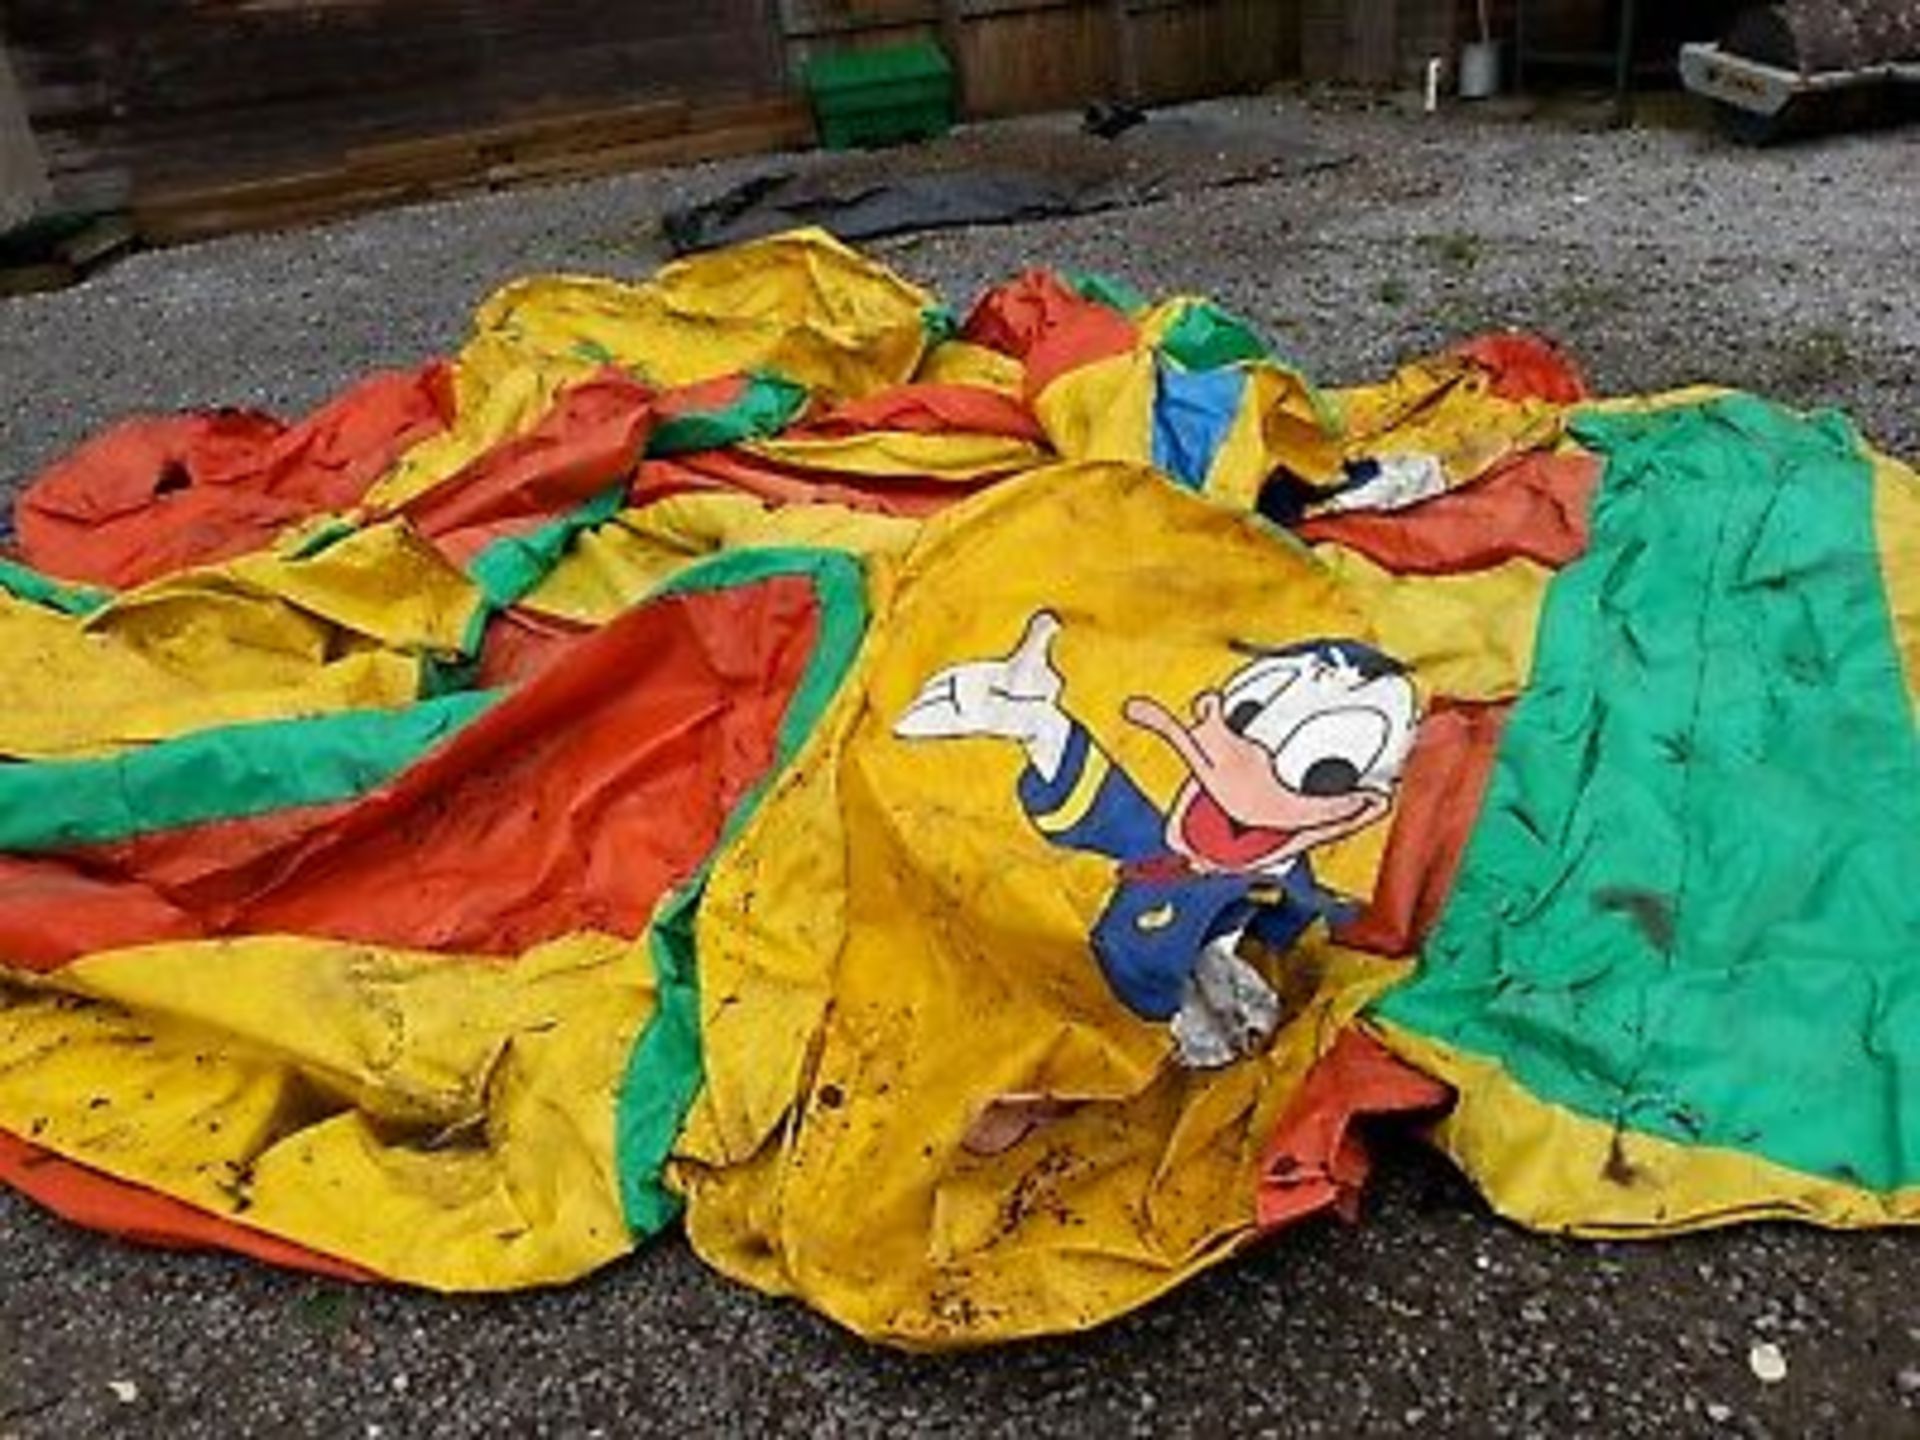 12ft by 14ft Big Bed Donald Duck Bouncy Castle - Image 5 of 5